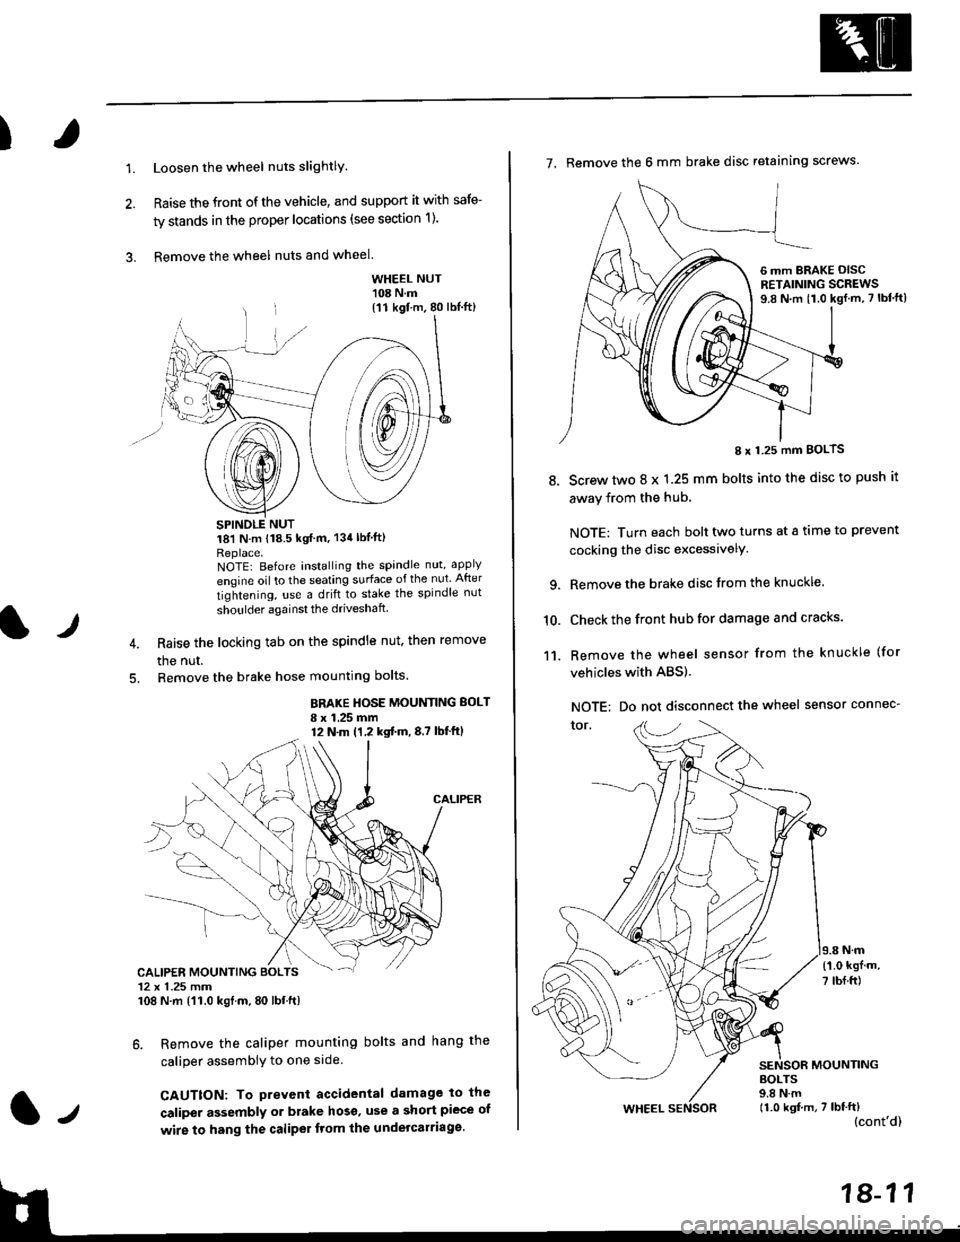 HONDA CIVIC 1998 6.G Owners Guide )
1.Loosen the wheel nuts slightlY.
Raise the front of the vehicle, and support it with safe-
ty stands in the proper locations (see section 1).
Remove the wheel nuts and wheel.3.
l)
WHEEL NUT108 N.m